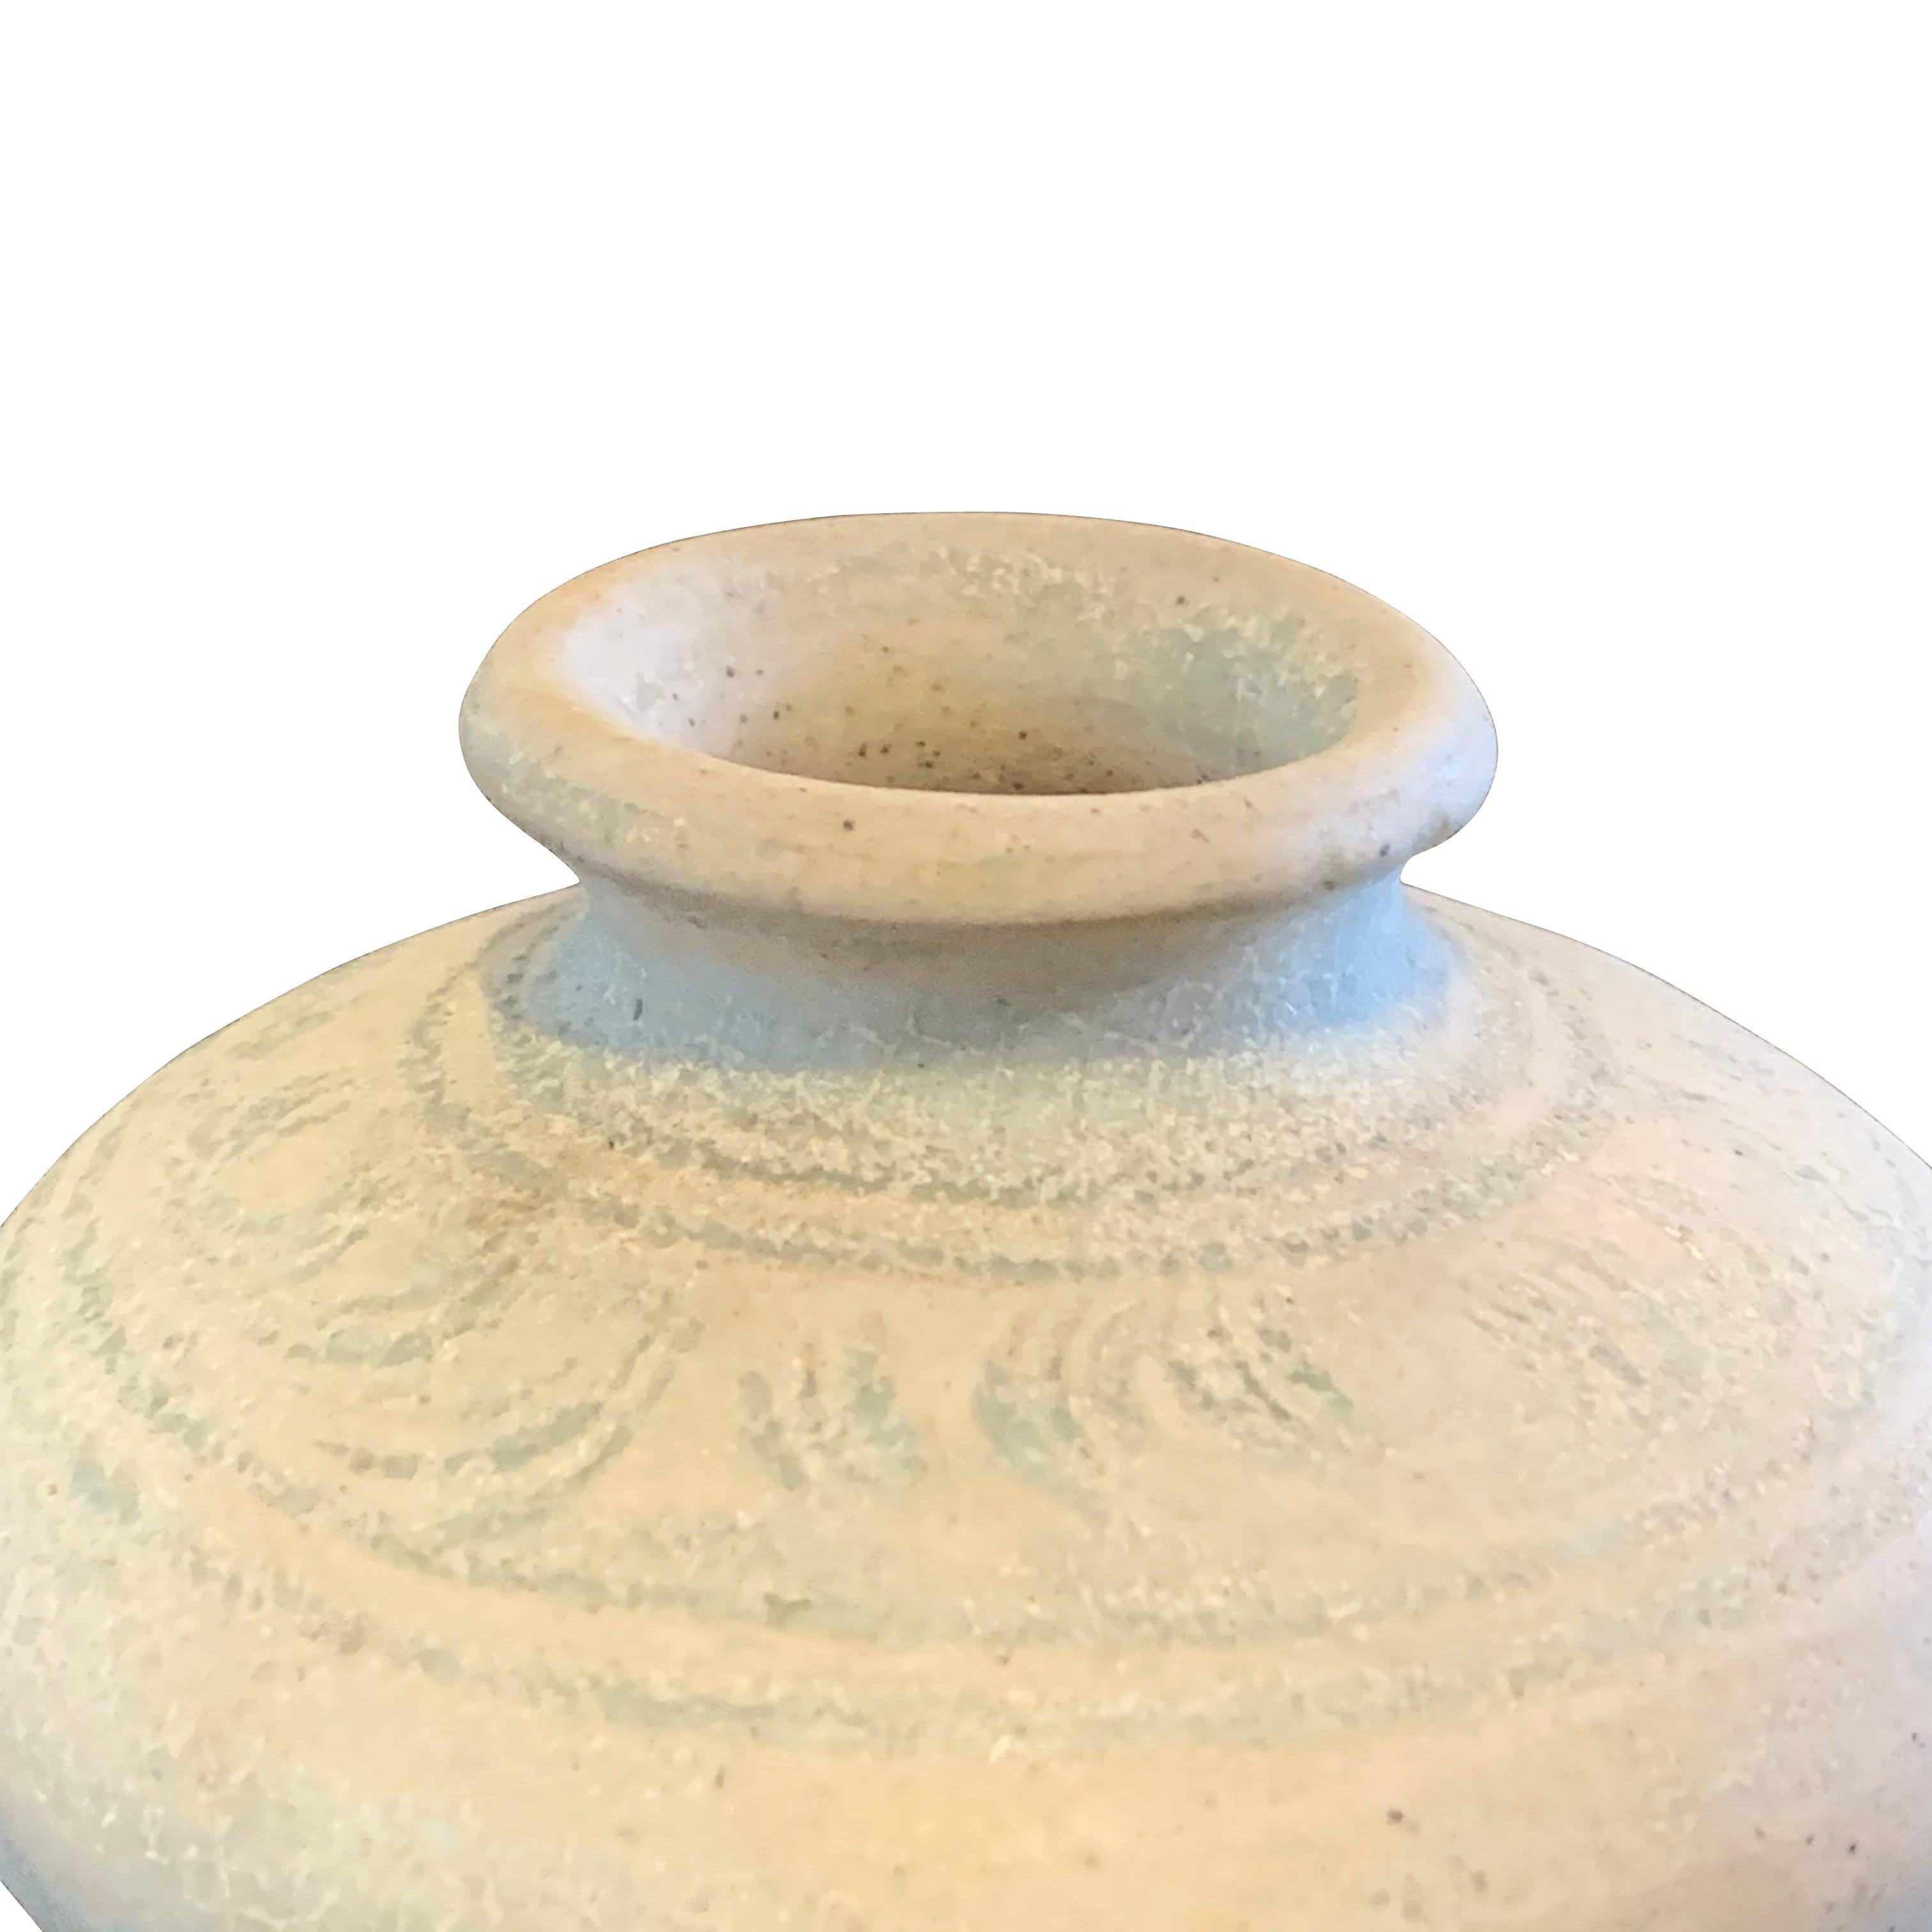 16th century pottery from the Sawankhalok district in the Sukhothai which is a provence of Thailand.
This small pot has a faded hand painted grey design and a natural aged patina.
We have a collection of small pots from Asia which are sold